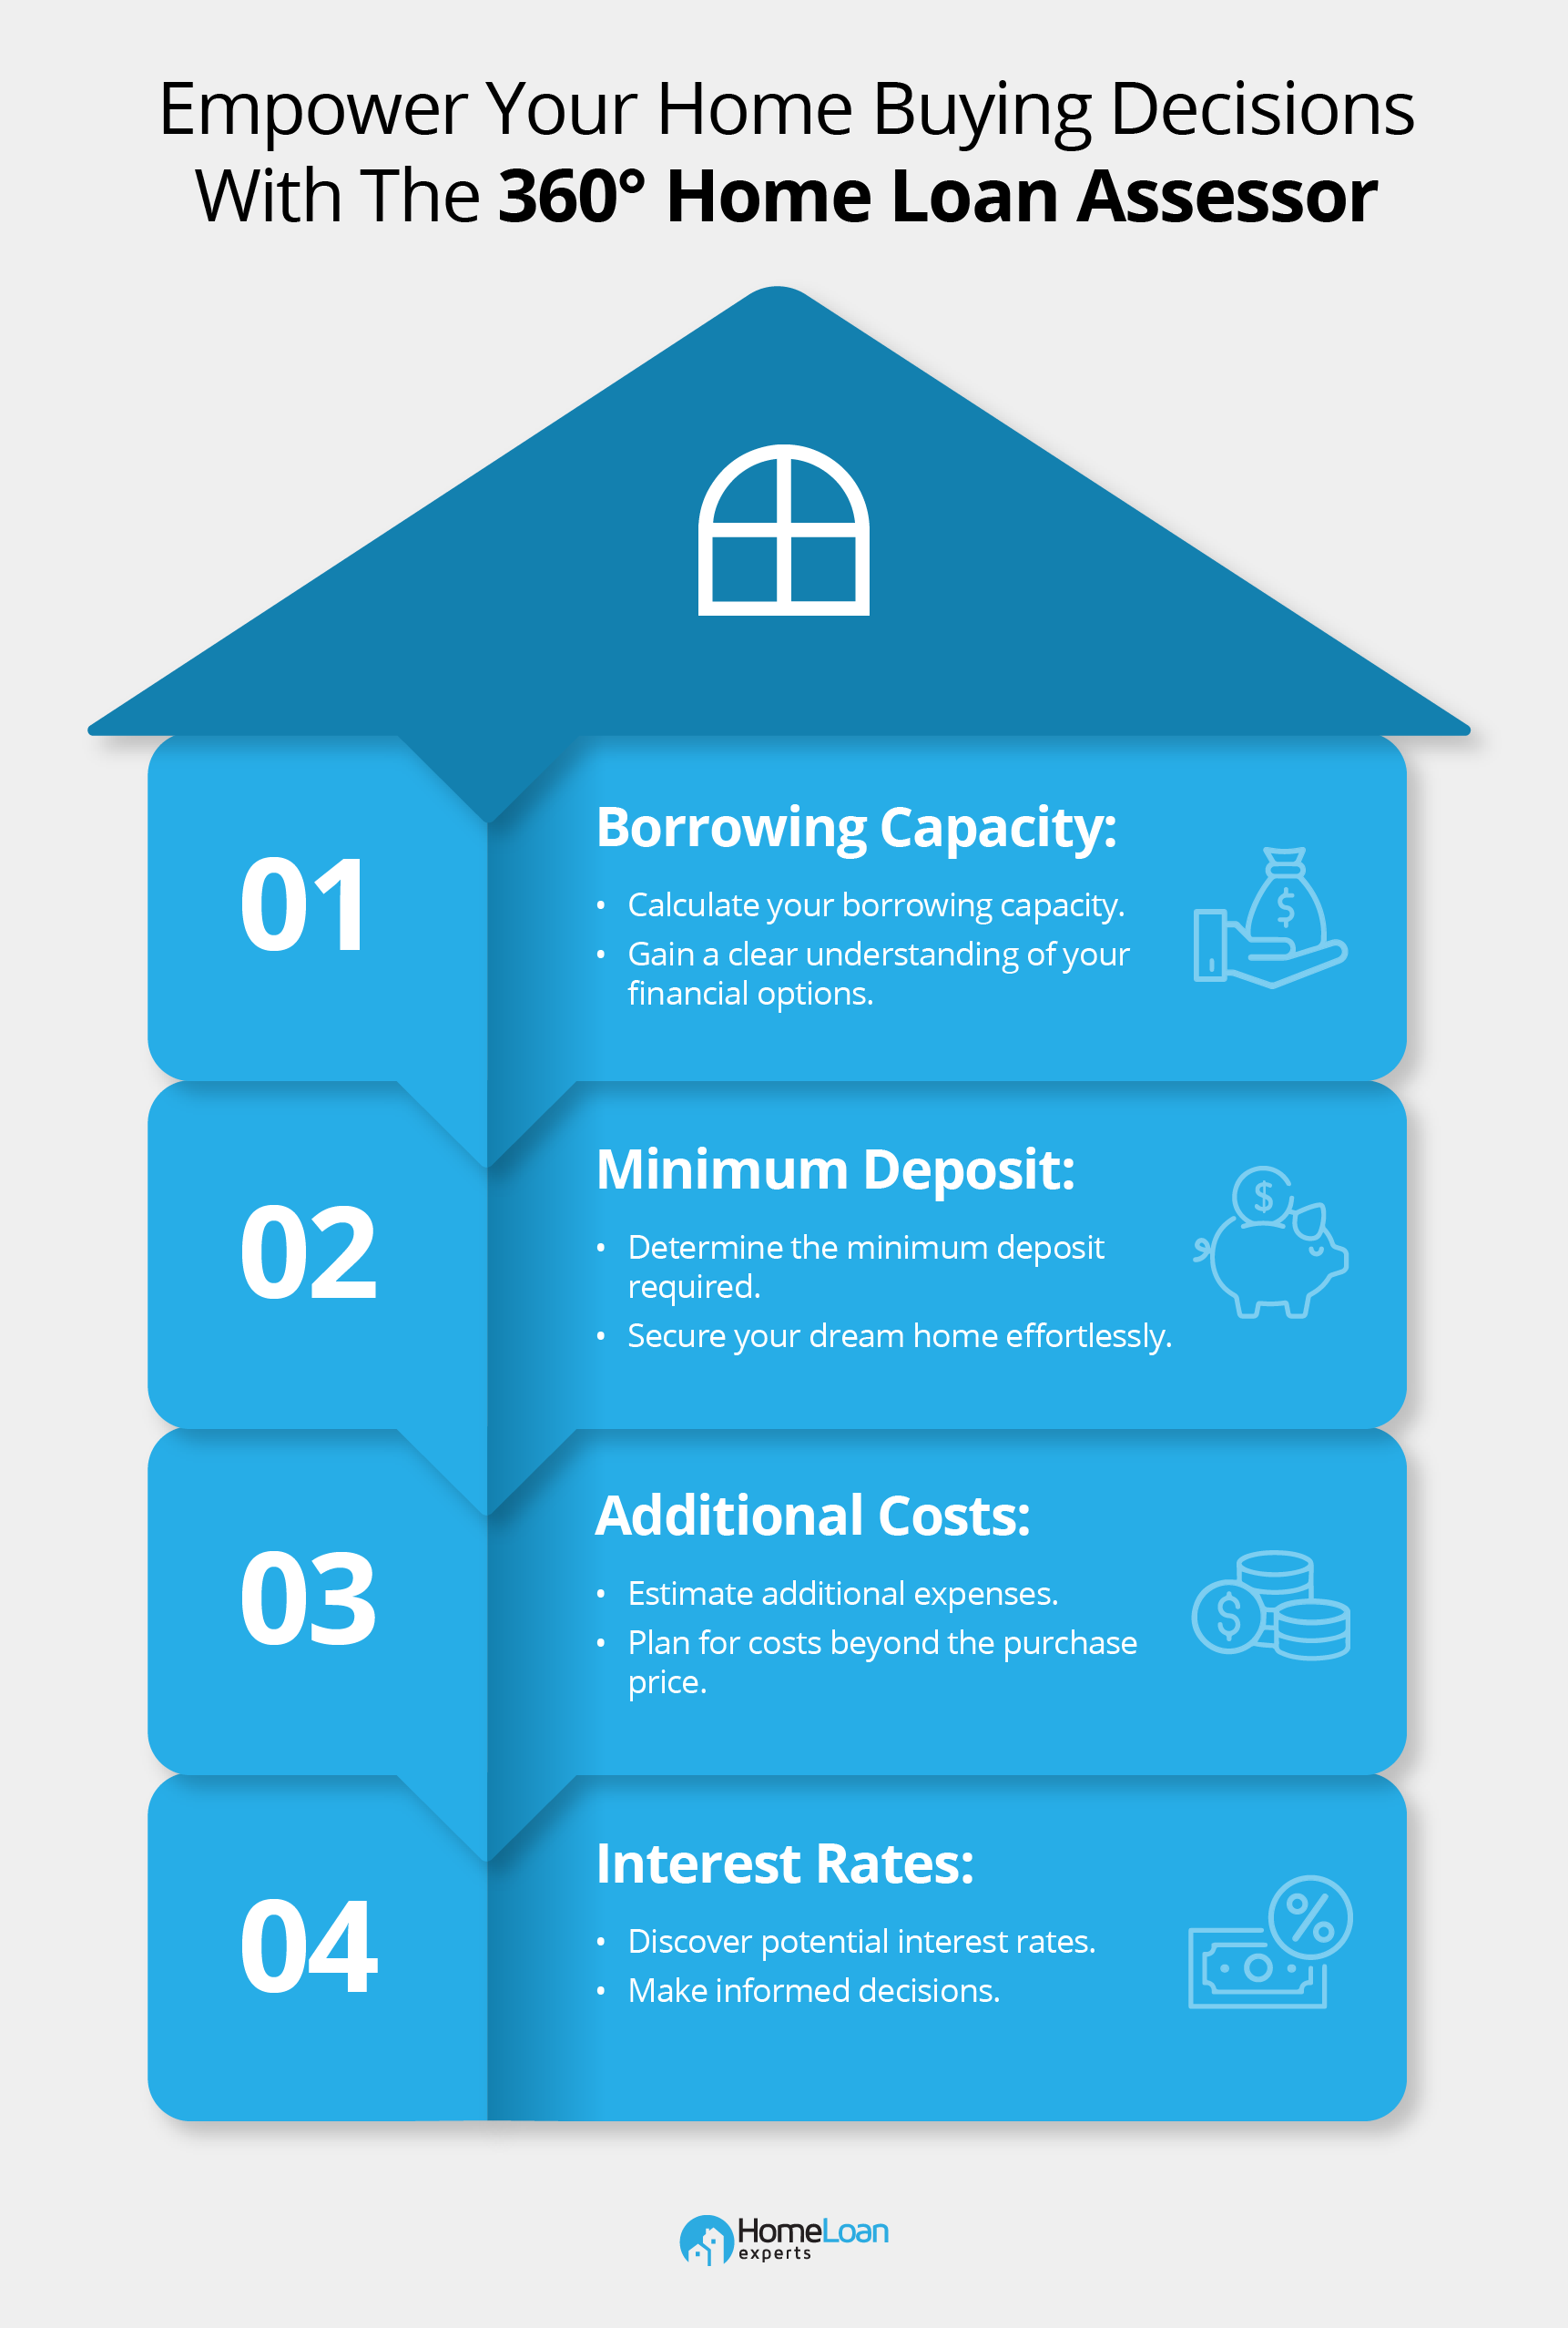 Steps to buying a home with the 360° Home Loan Assessor: understand borrowing capacity, determine minimum deposit, assess costs, and compare rates.